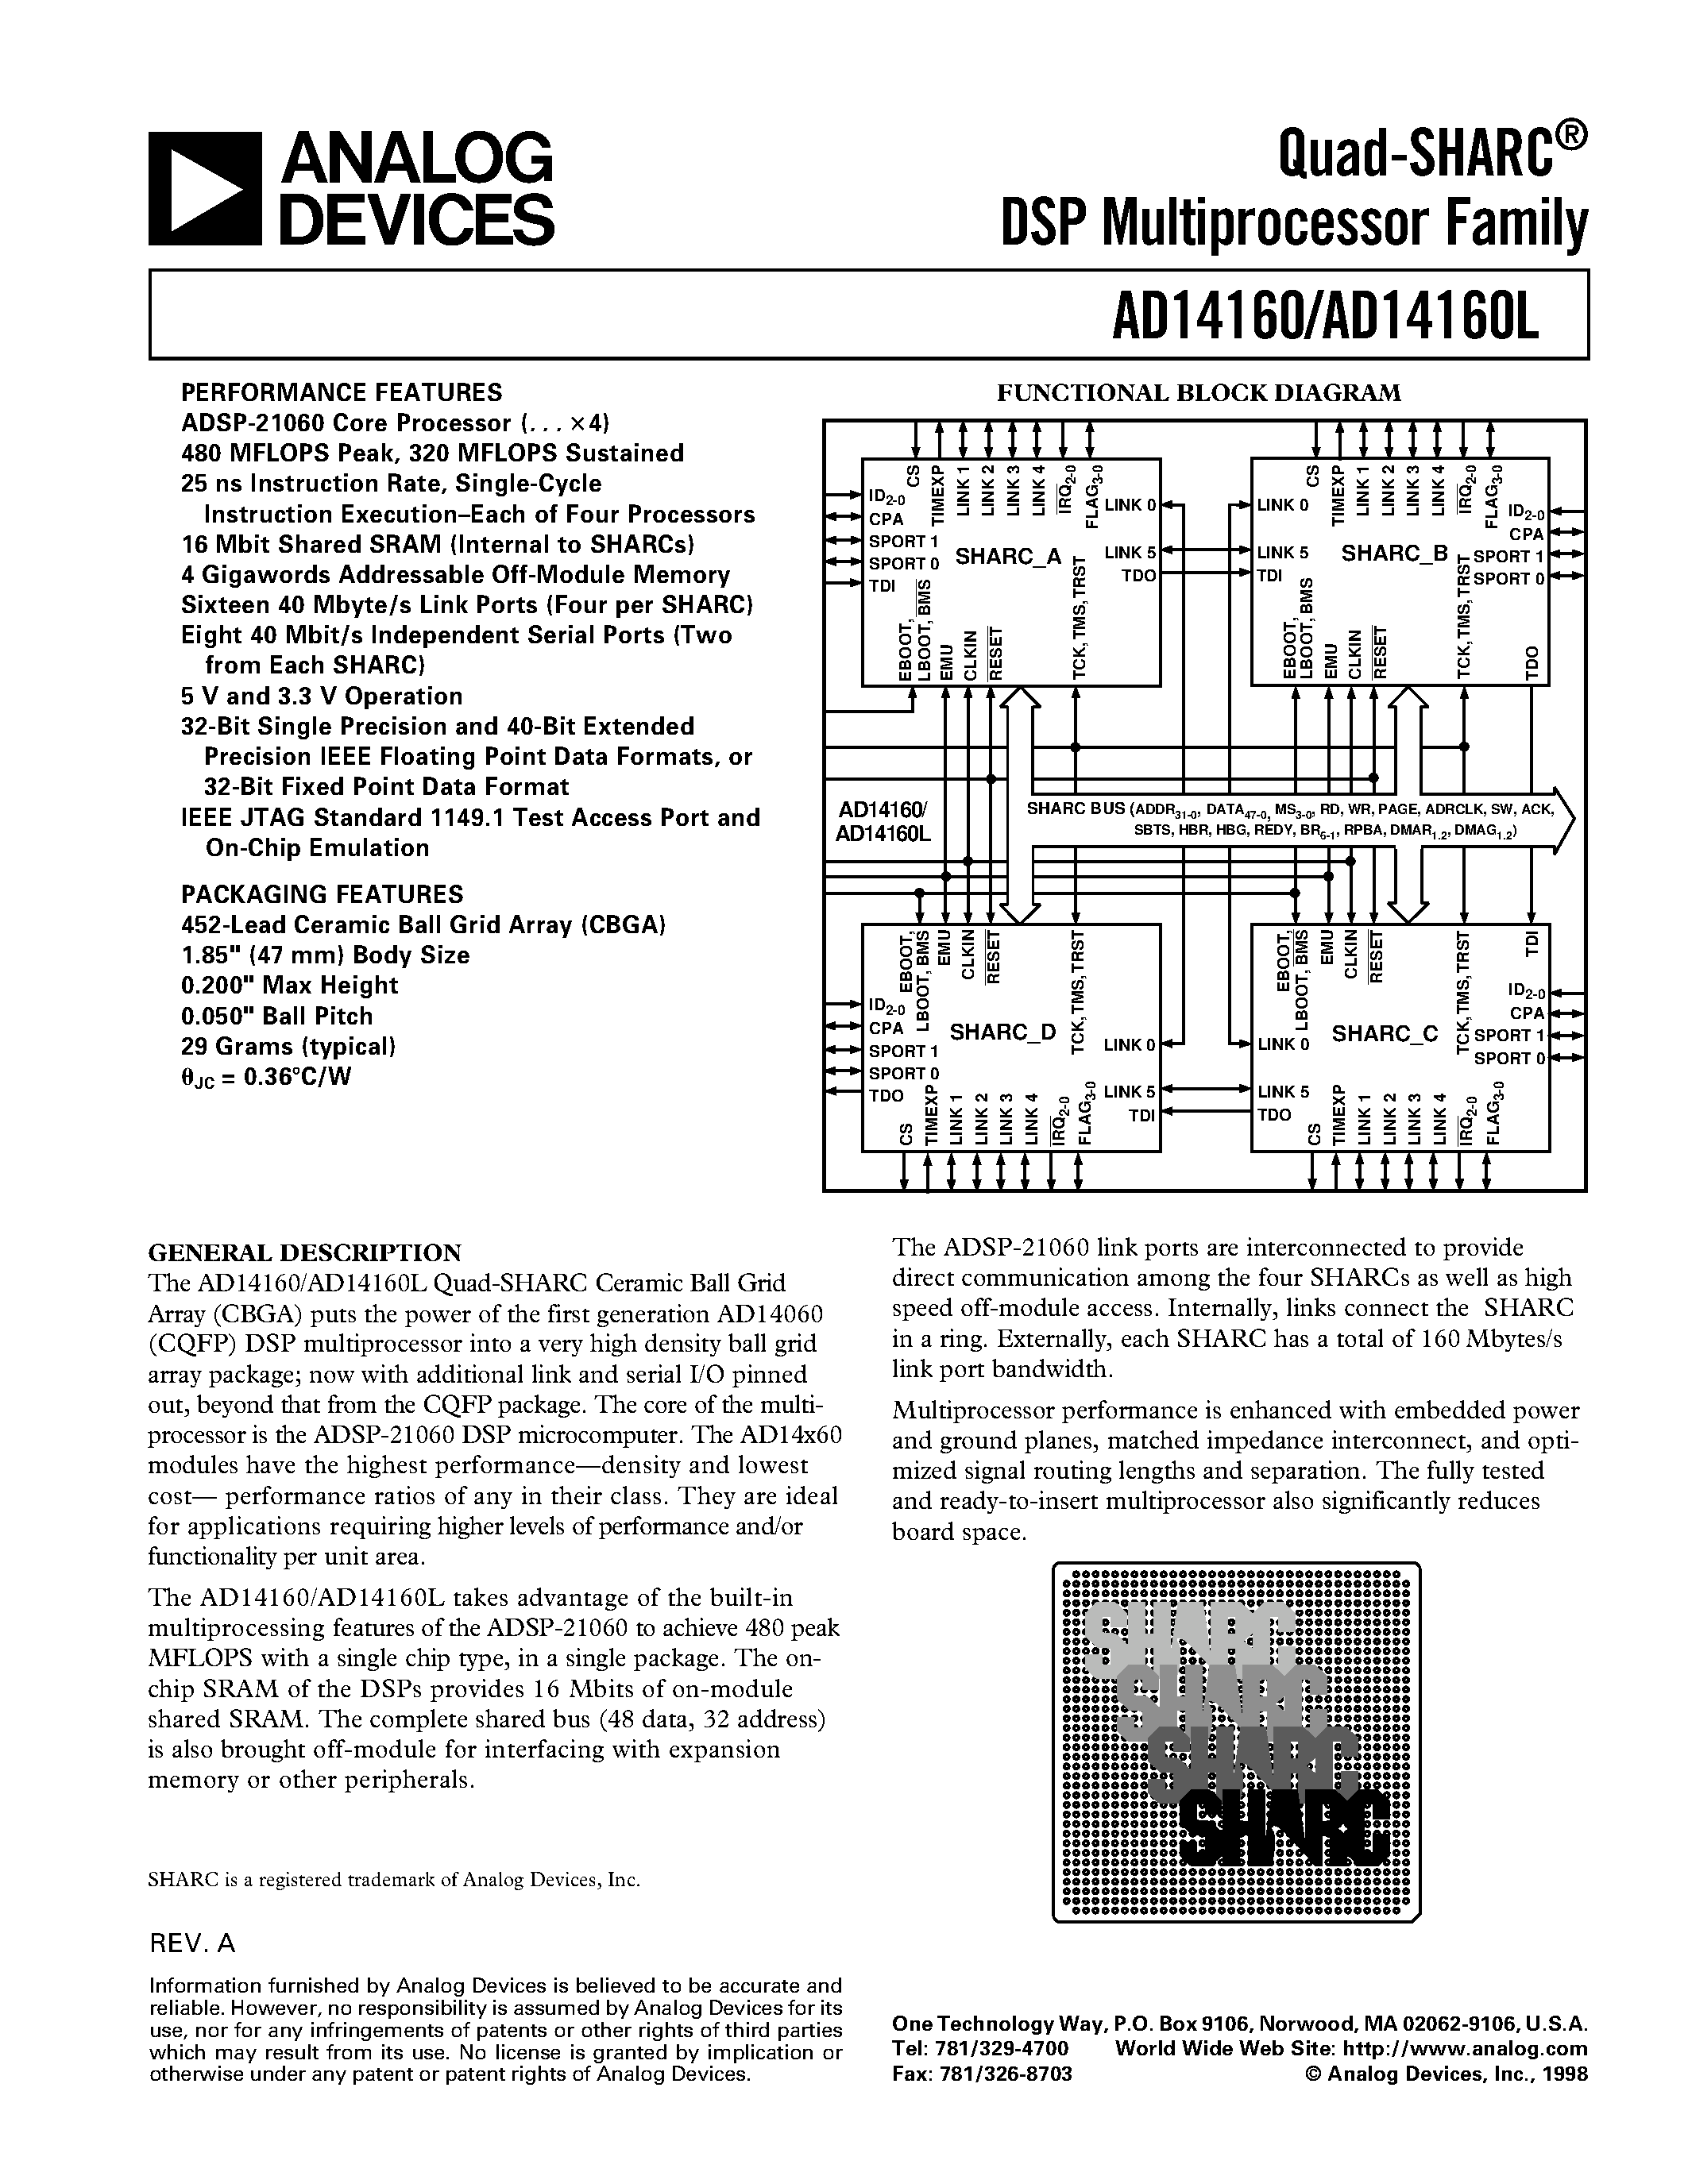 Datasheet AD14160BB-4 - Quad-SHARC DSP Multiprocessor Family page 1